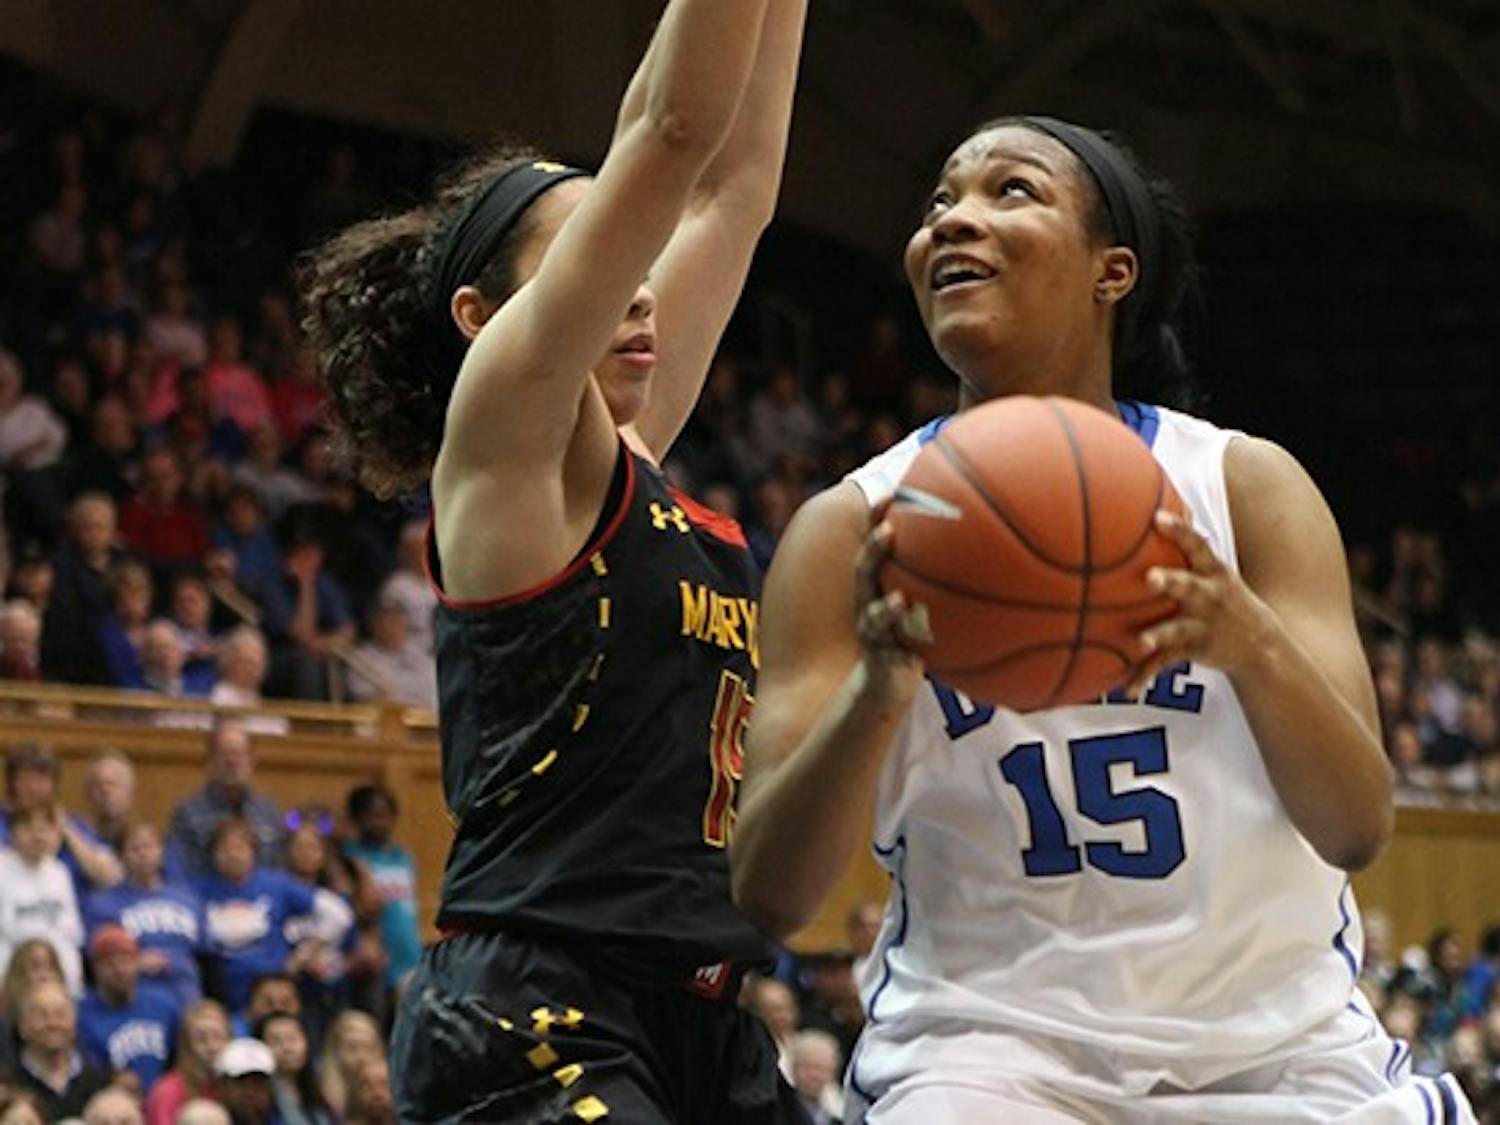 The No. 5 Duke women's basketball team defeated No. 7 Maryland 71-56, led by a career-high 28 points from guard Chelsea Gray.